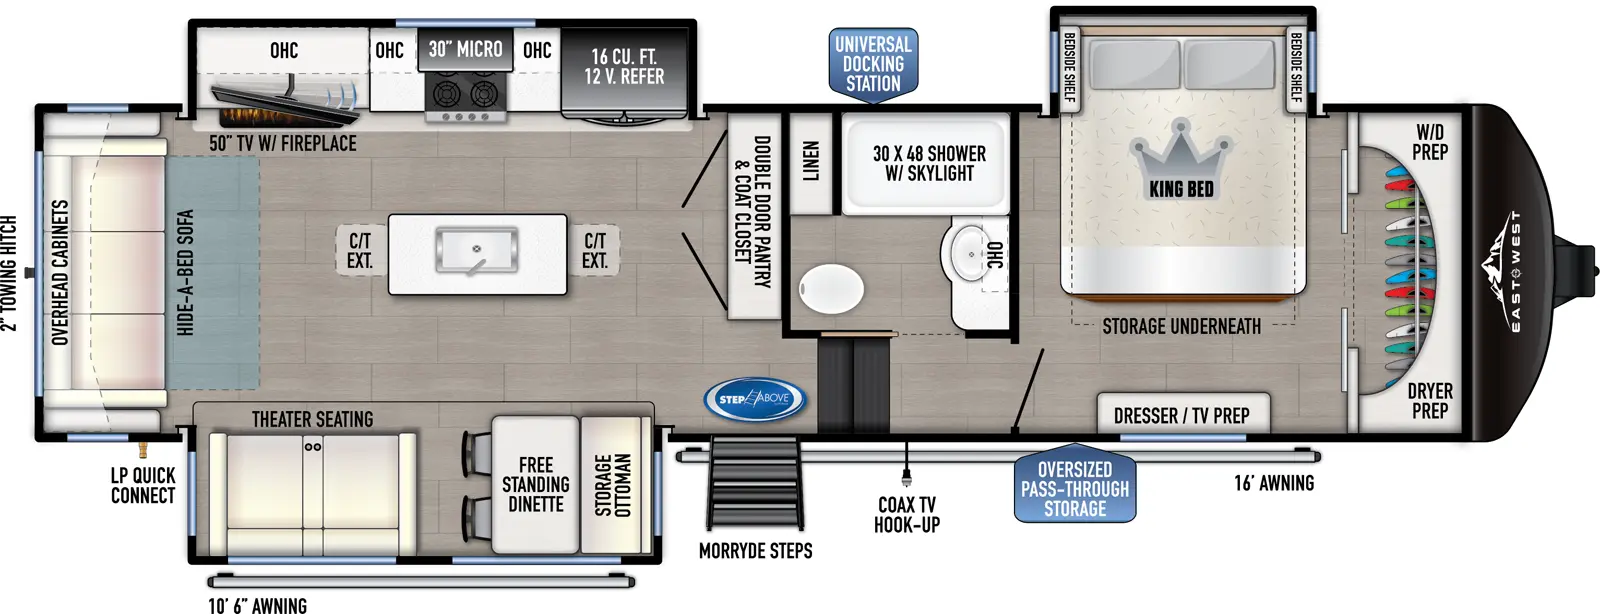 The 320RL has 3 slideouts and one entry. Exterior features an oversized pass through storage, universal docking station, MORryde steps, coax TV hookup, 10 foot 6 inch awning and 16 foot awning, LP quick connect, and 2 inch towing hitch. Interior layout front to back: front closet with washer/dryer prep, off-door side king bed slideout with storage underneath, and door side dresser with TV prep; off-door side full bathroom with overhead cabinet, linen closet, and shower with skylight; steps down to main living area and entry; double door pantry and coat closet along inner wall; off-door side slideout with 12V refrigerator, overhead cabinet, microwave, cooktop, and TV with fireplace; kitchen island with sink and extensions; door side slideout with free-standing dinette with storage ottoman, and theater seating; rear hide-a-bed sofa and overhead cabinet.